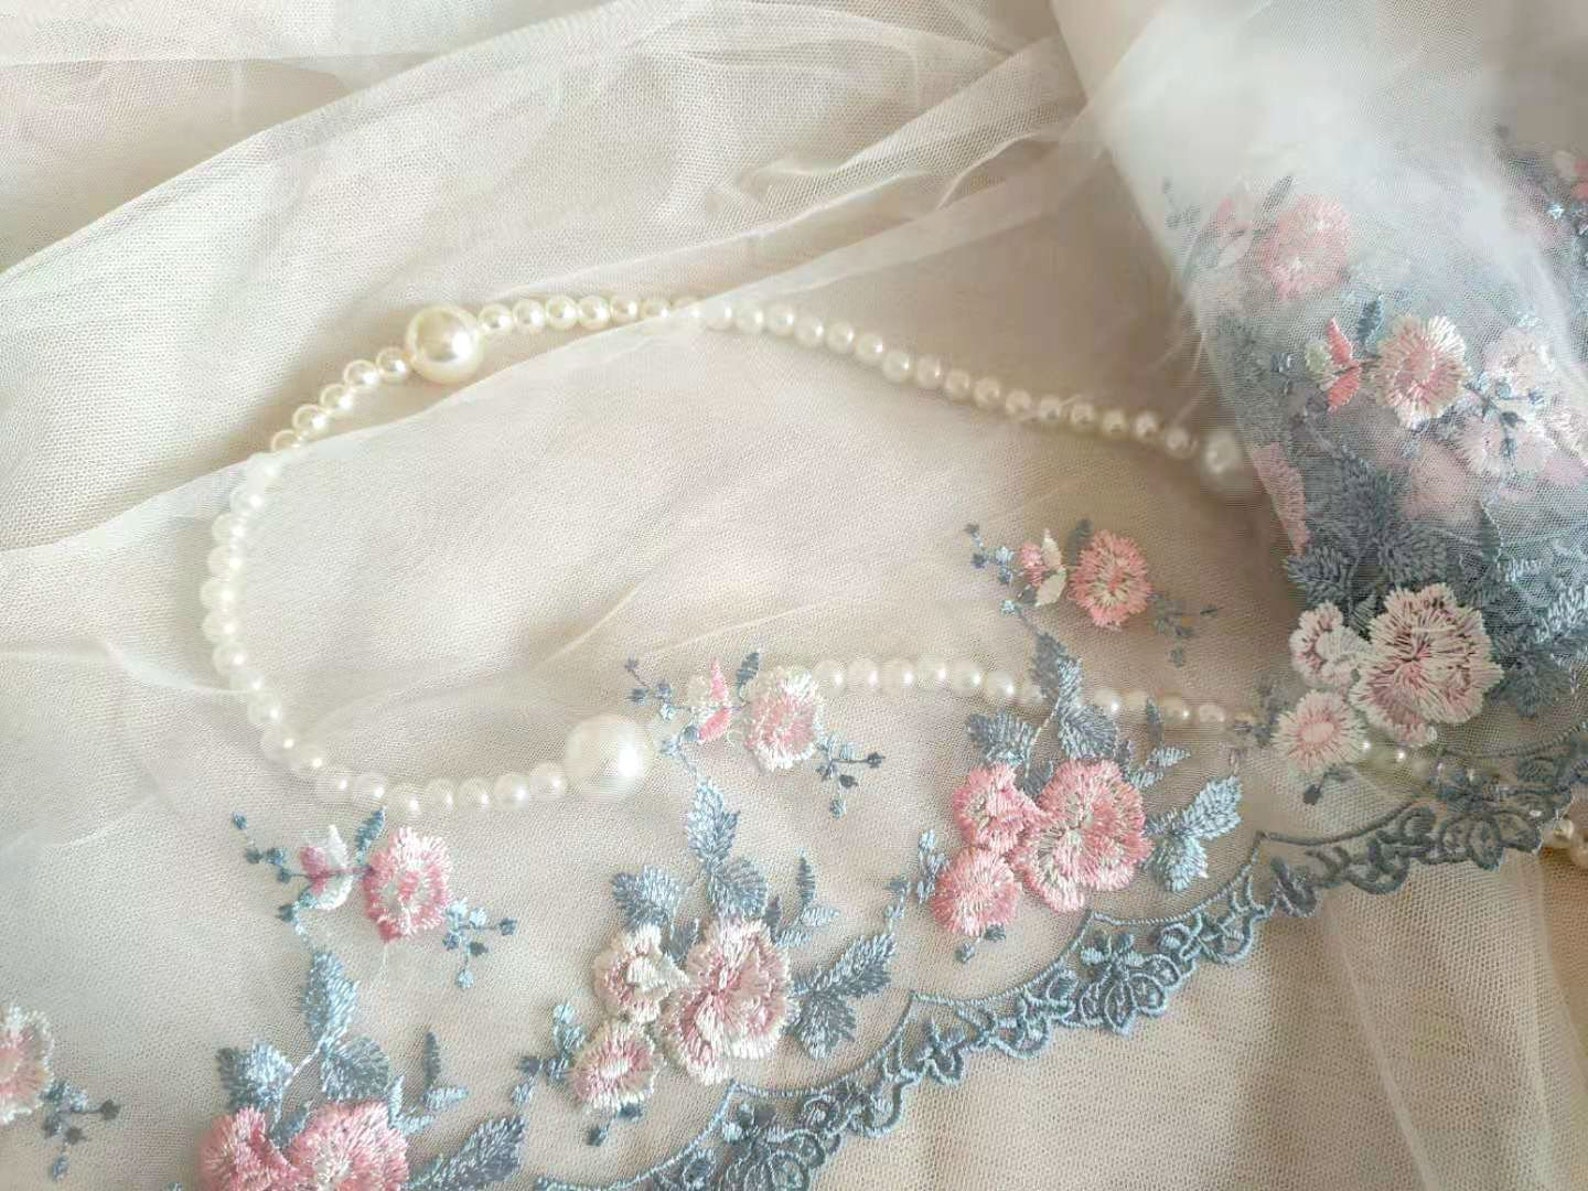 Lovely Tulle Lace Trim Grey Pink Floral Embroidered Lace Trim | Etsy